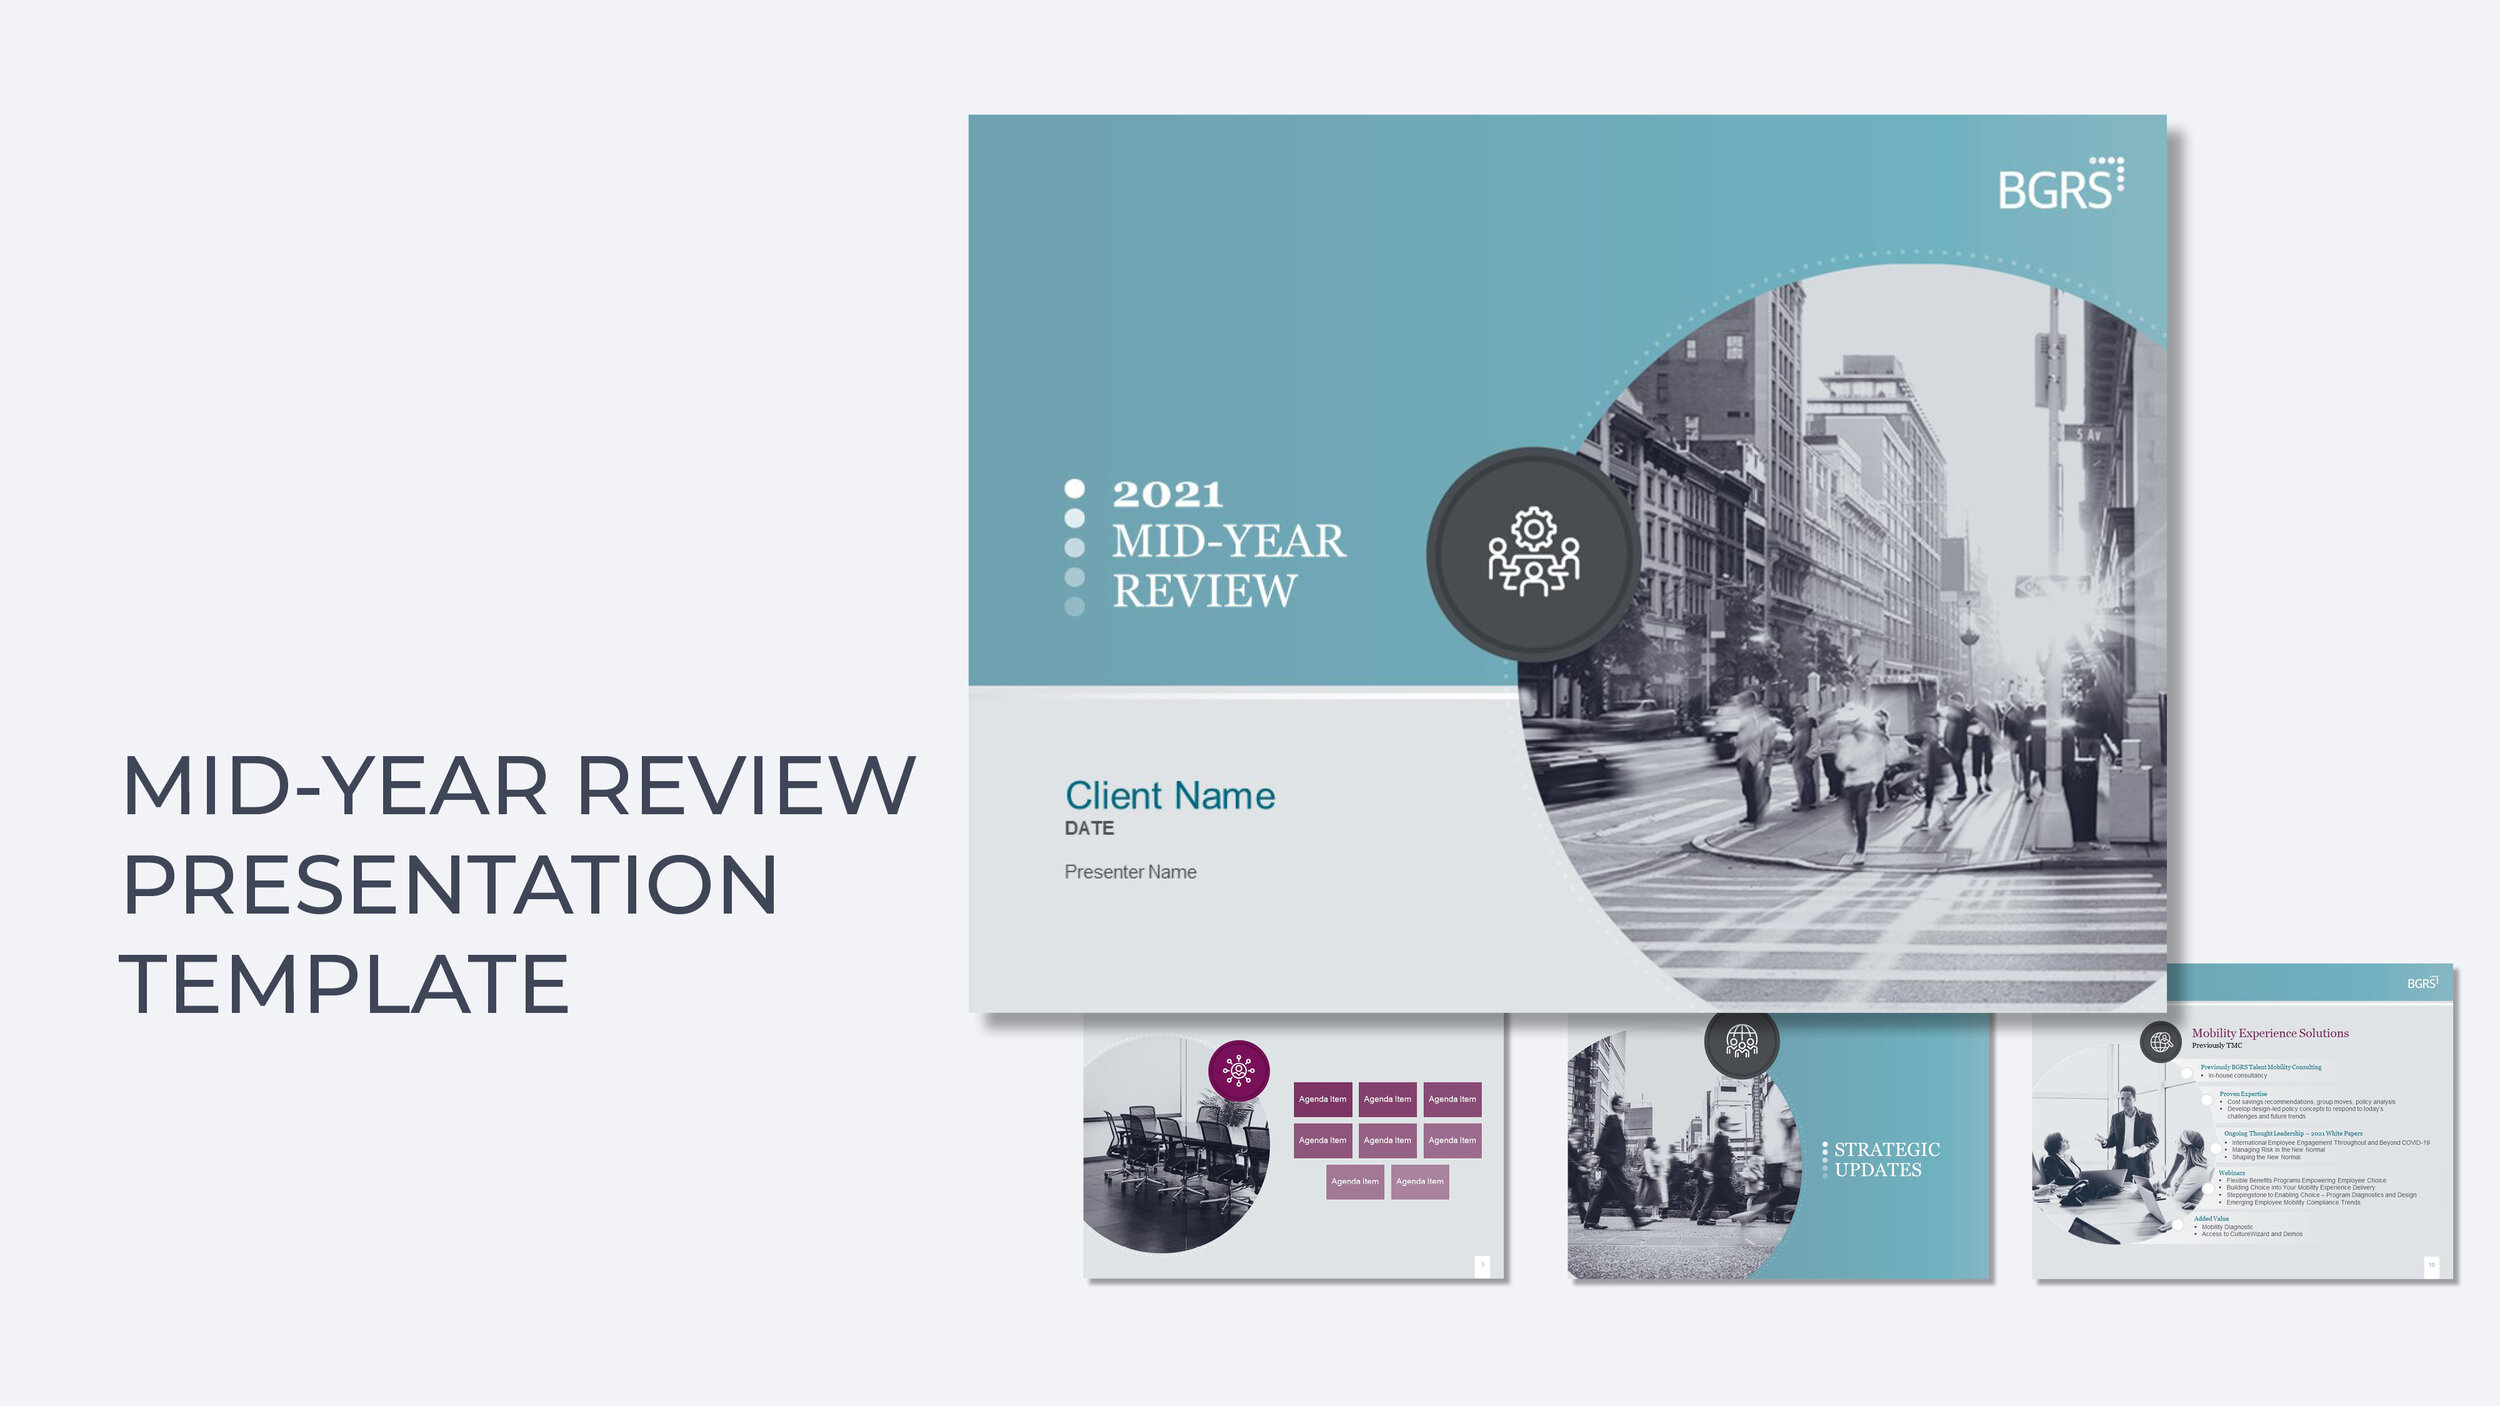 Mid-Year Review Presentation Template